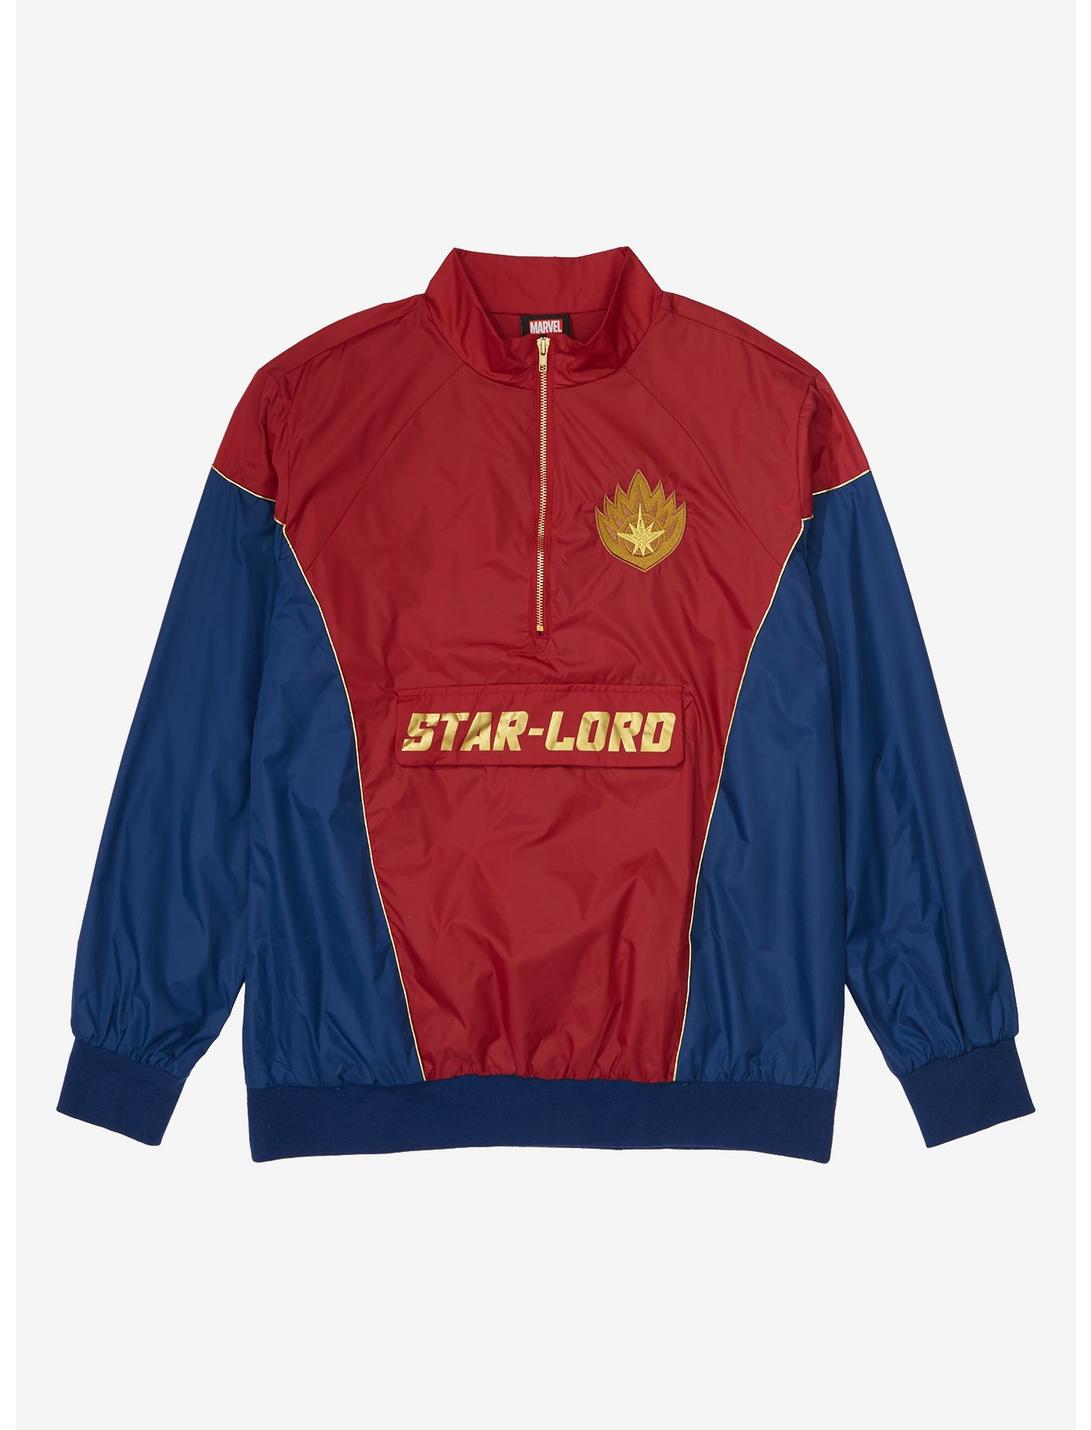 Marvel Guardians of the Galaxy Star-Lord Quarter-Zip Anorak Jacket - BoxLunch Exclusive, BURGUNDY, hi-res